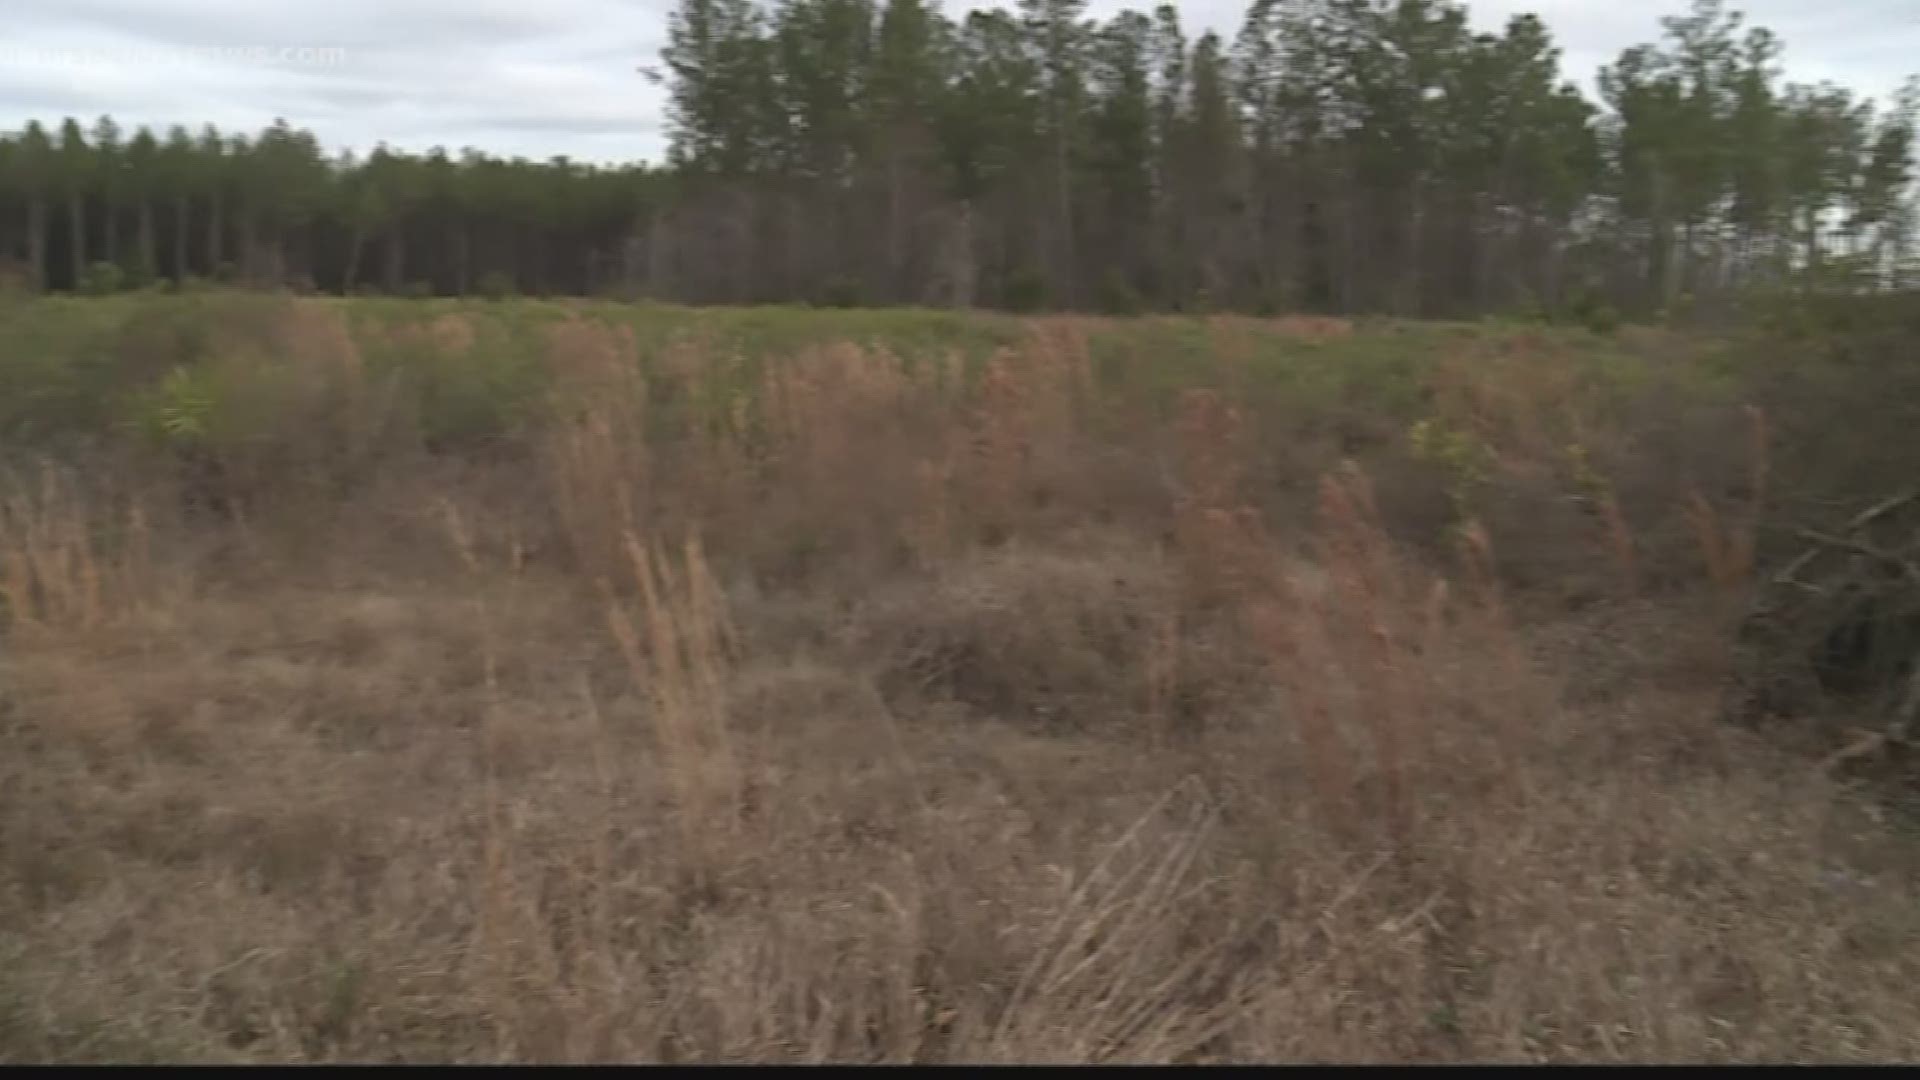 The Brantley County Development Partners LLC has filed an application to develop a landfill in the area and many locals oppose it.